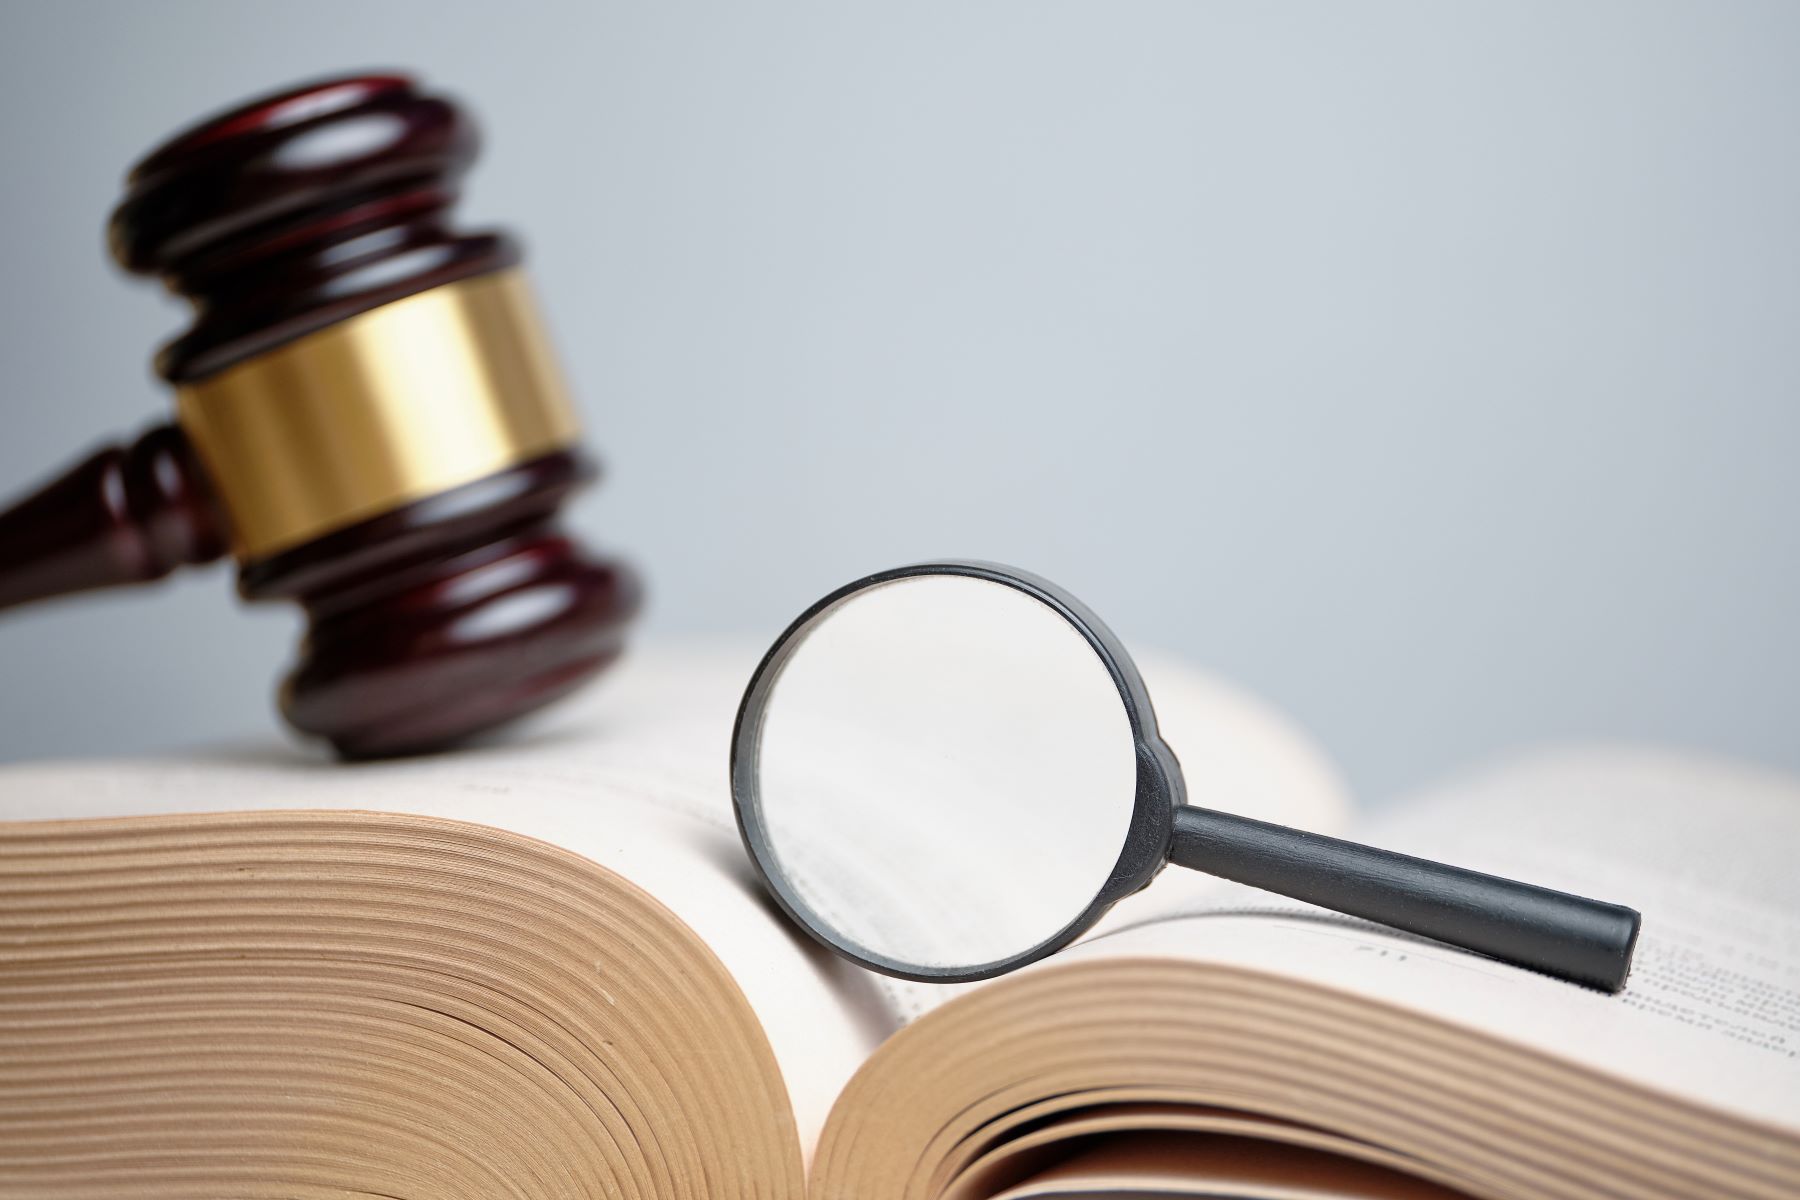 Litigation Support Investigations and Legal Investigations
